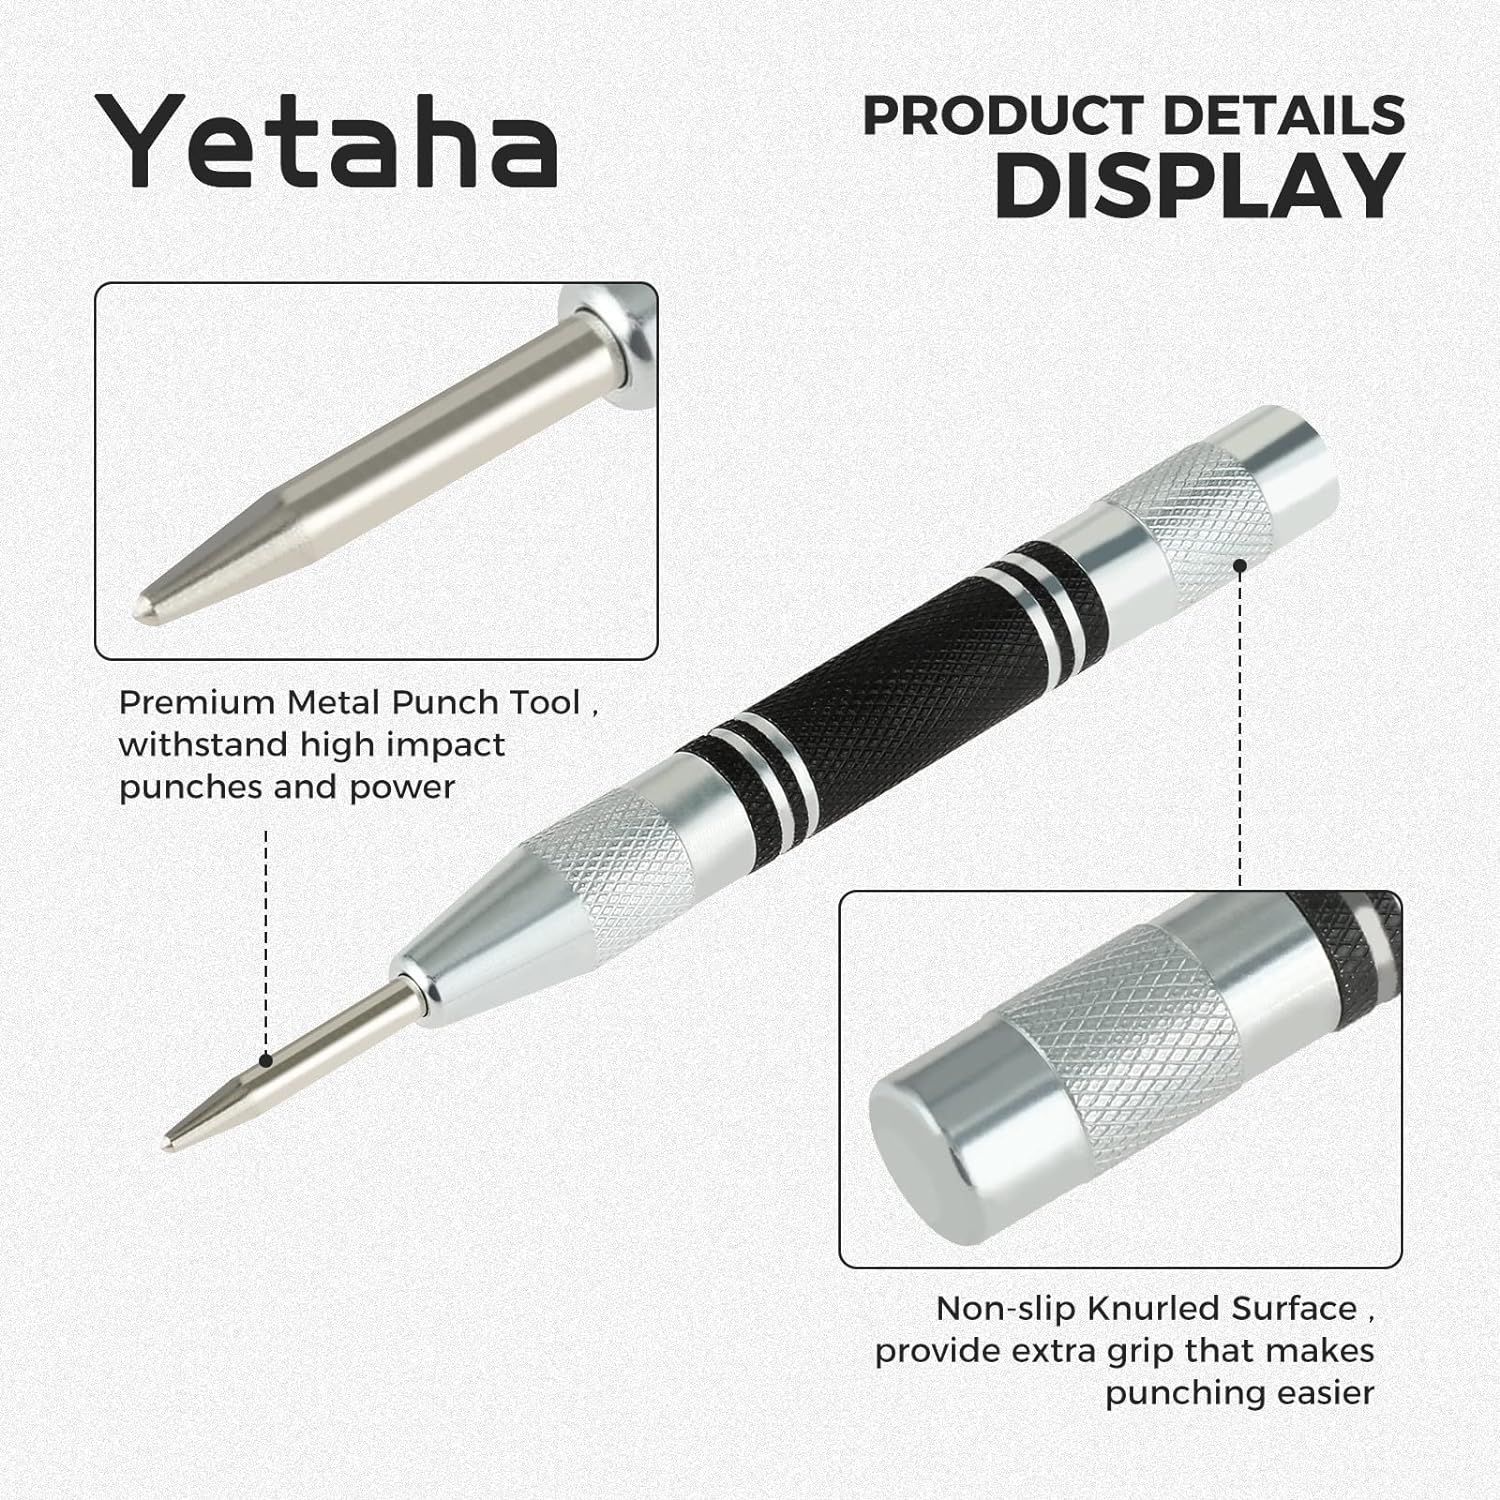 yetaha 3 Pack Automatic Center Punch,  5 Inch Heavy Duty Steel Spring Loaded Center Hole Punch with Adjustable Tension Punch Tool for